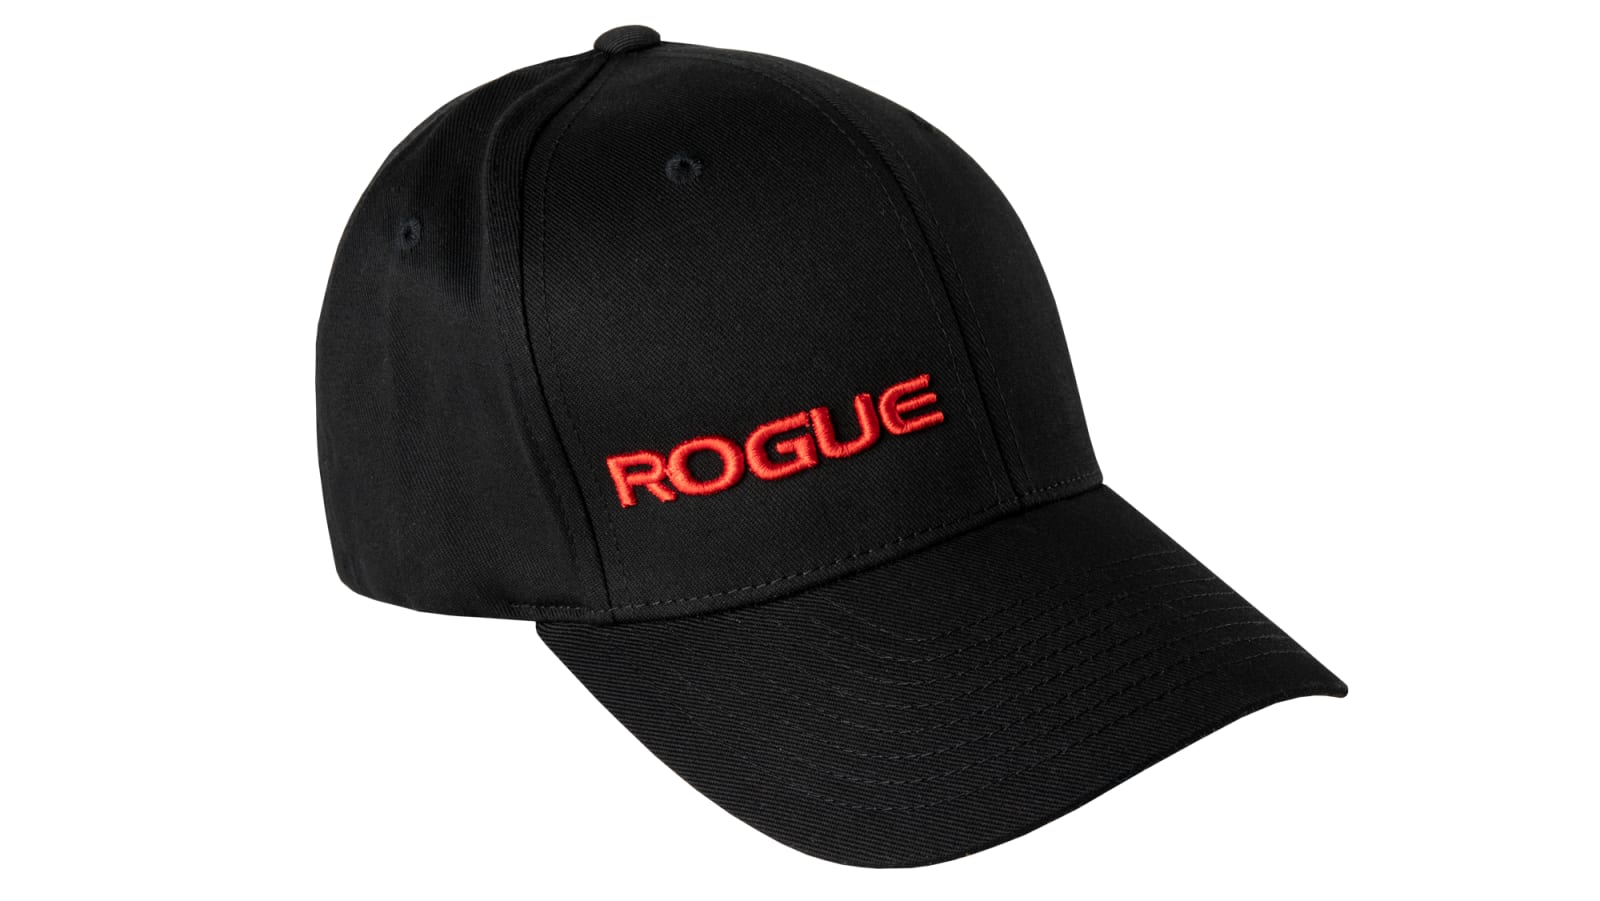 Rogue Rogue and - Fitness Red FlexFit Hat Black |